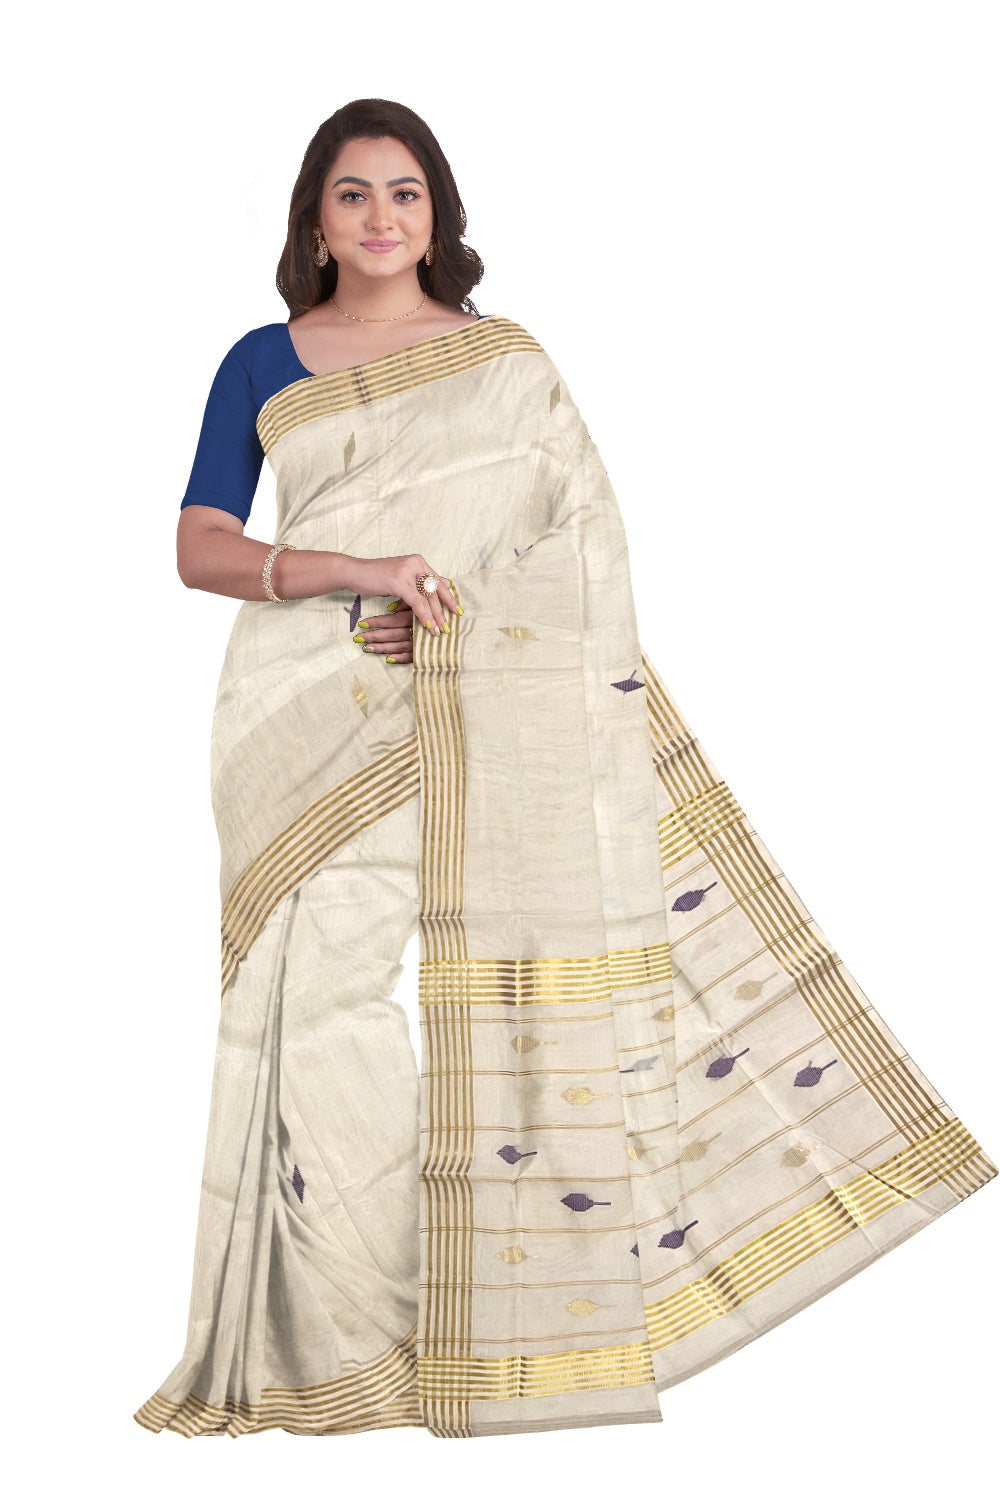 Southloom Kuthampully Handloom Onam Saree with Violet Butta Work on Body and Pallu